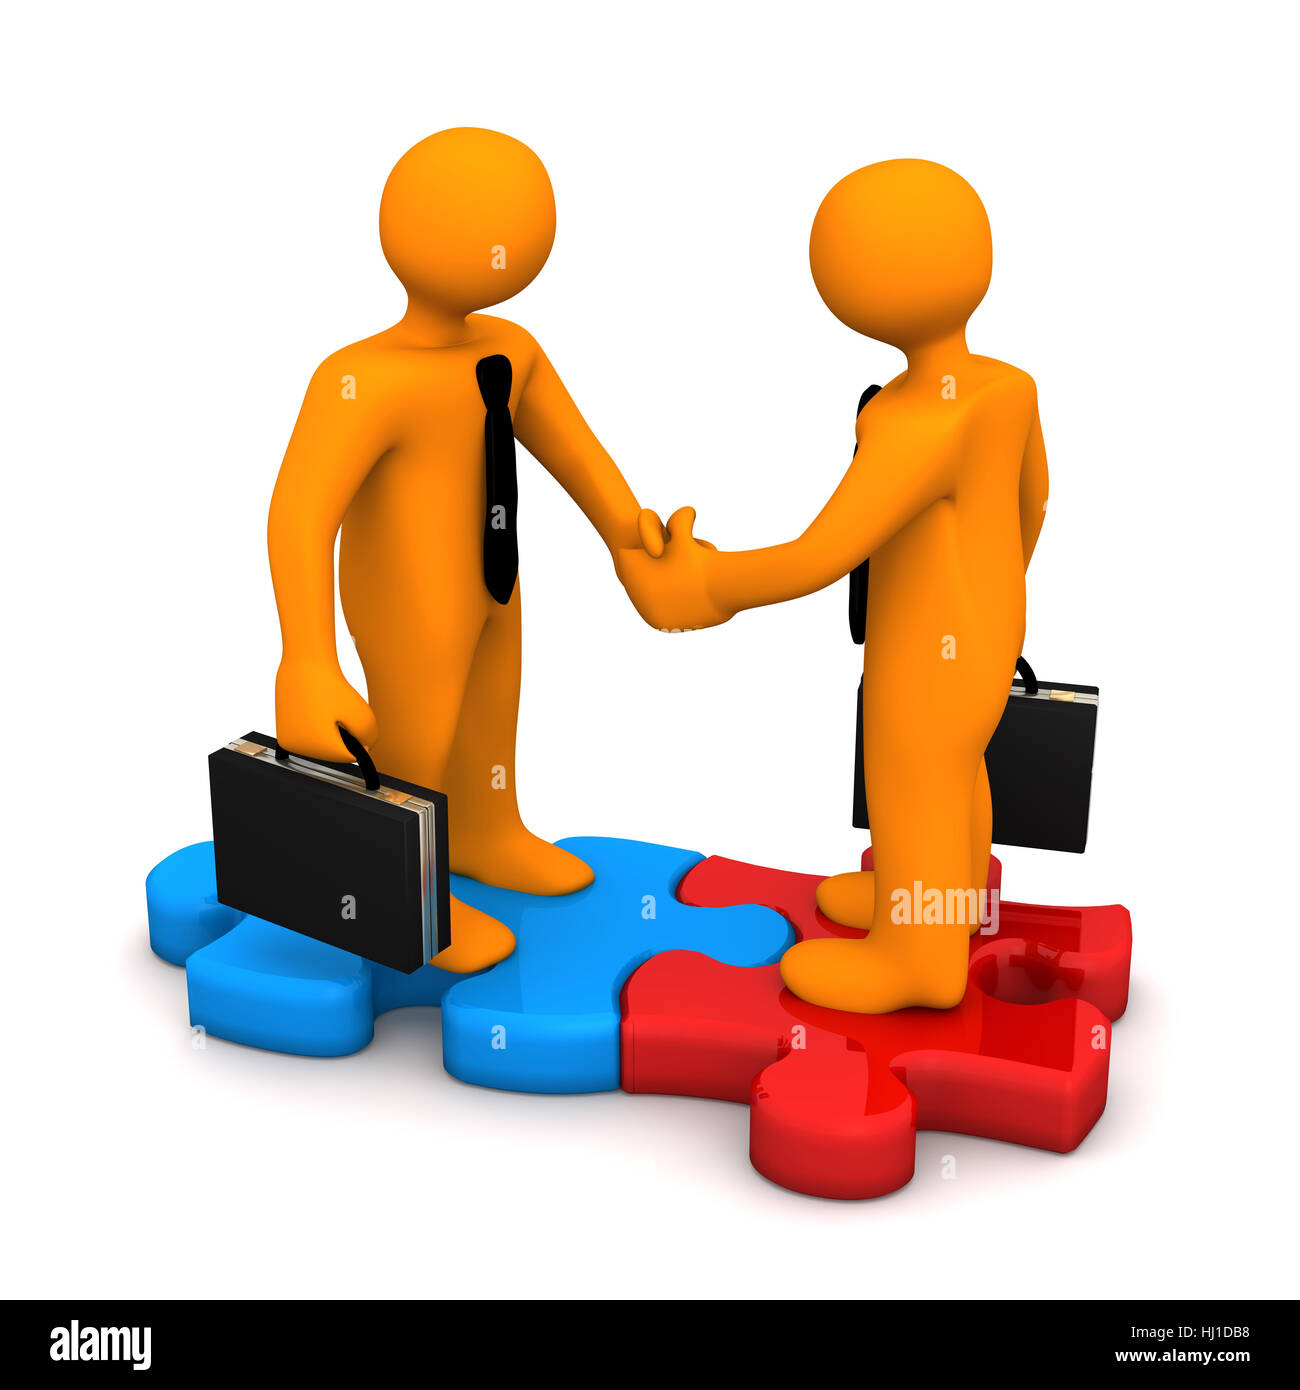 An Animation of a Handshake · Free Stock Photo